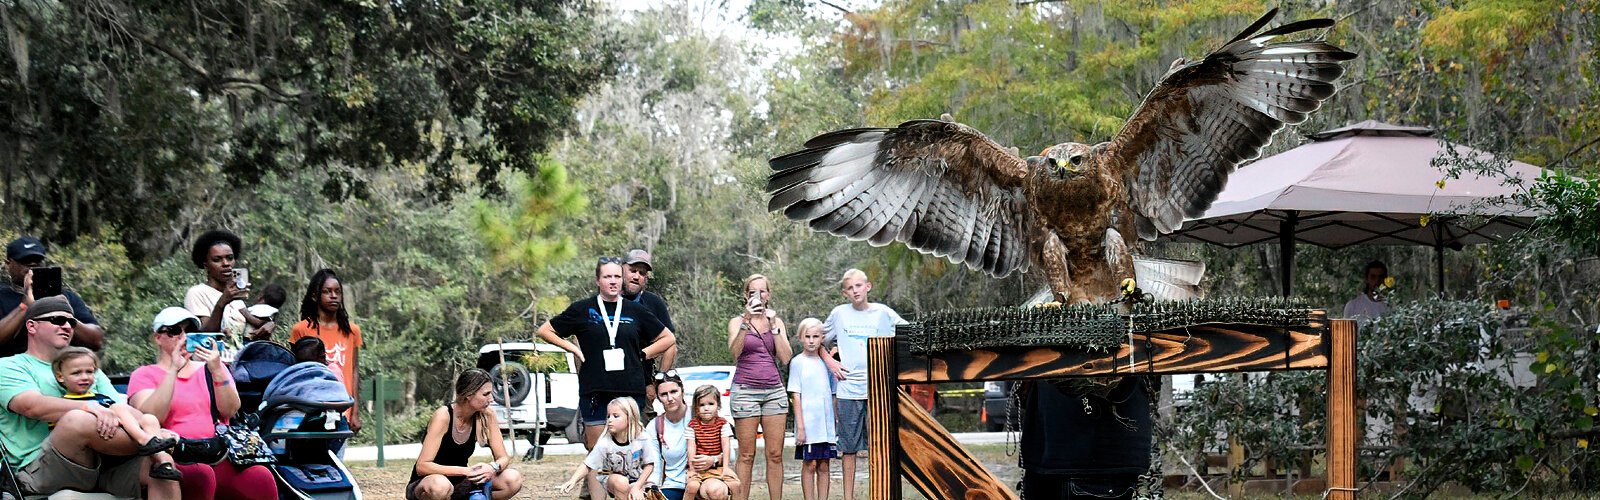 Mave, a European common buzzard, is showcased by Knight Wings at the fifth annual Wonders of Wildlife Festival on November 11th at Edward Medard Conservation Park in Plant City.